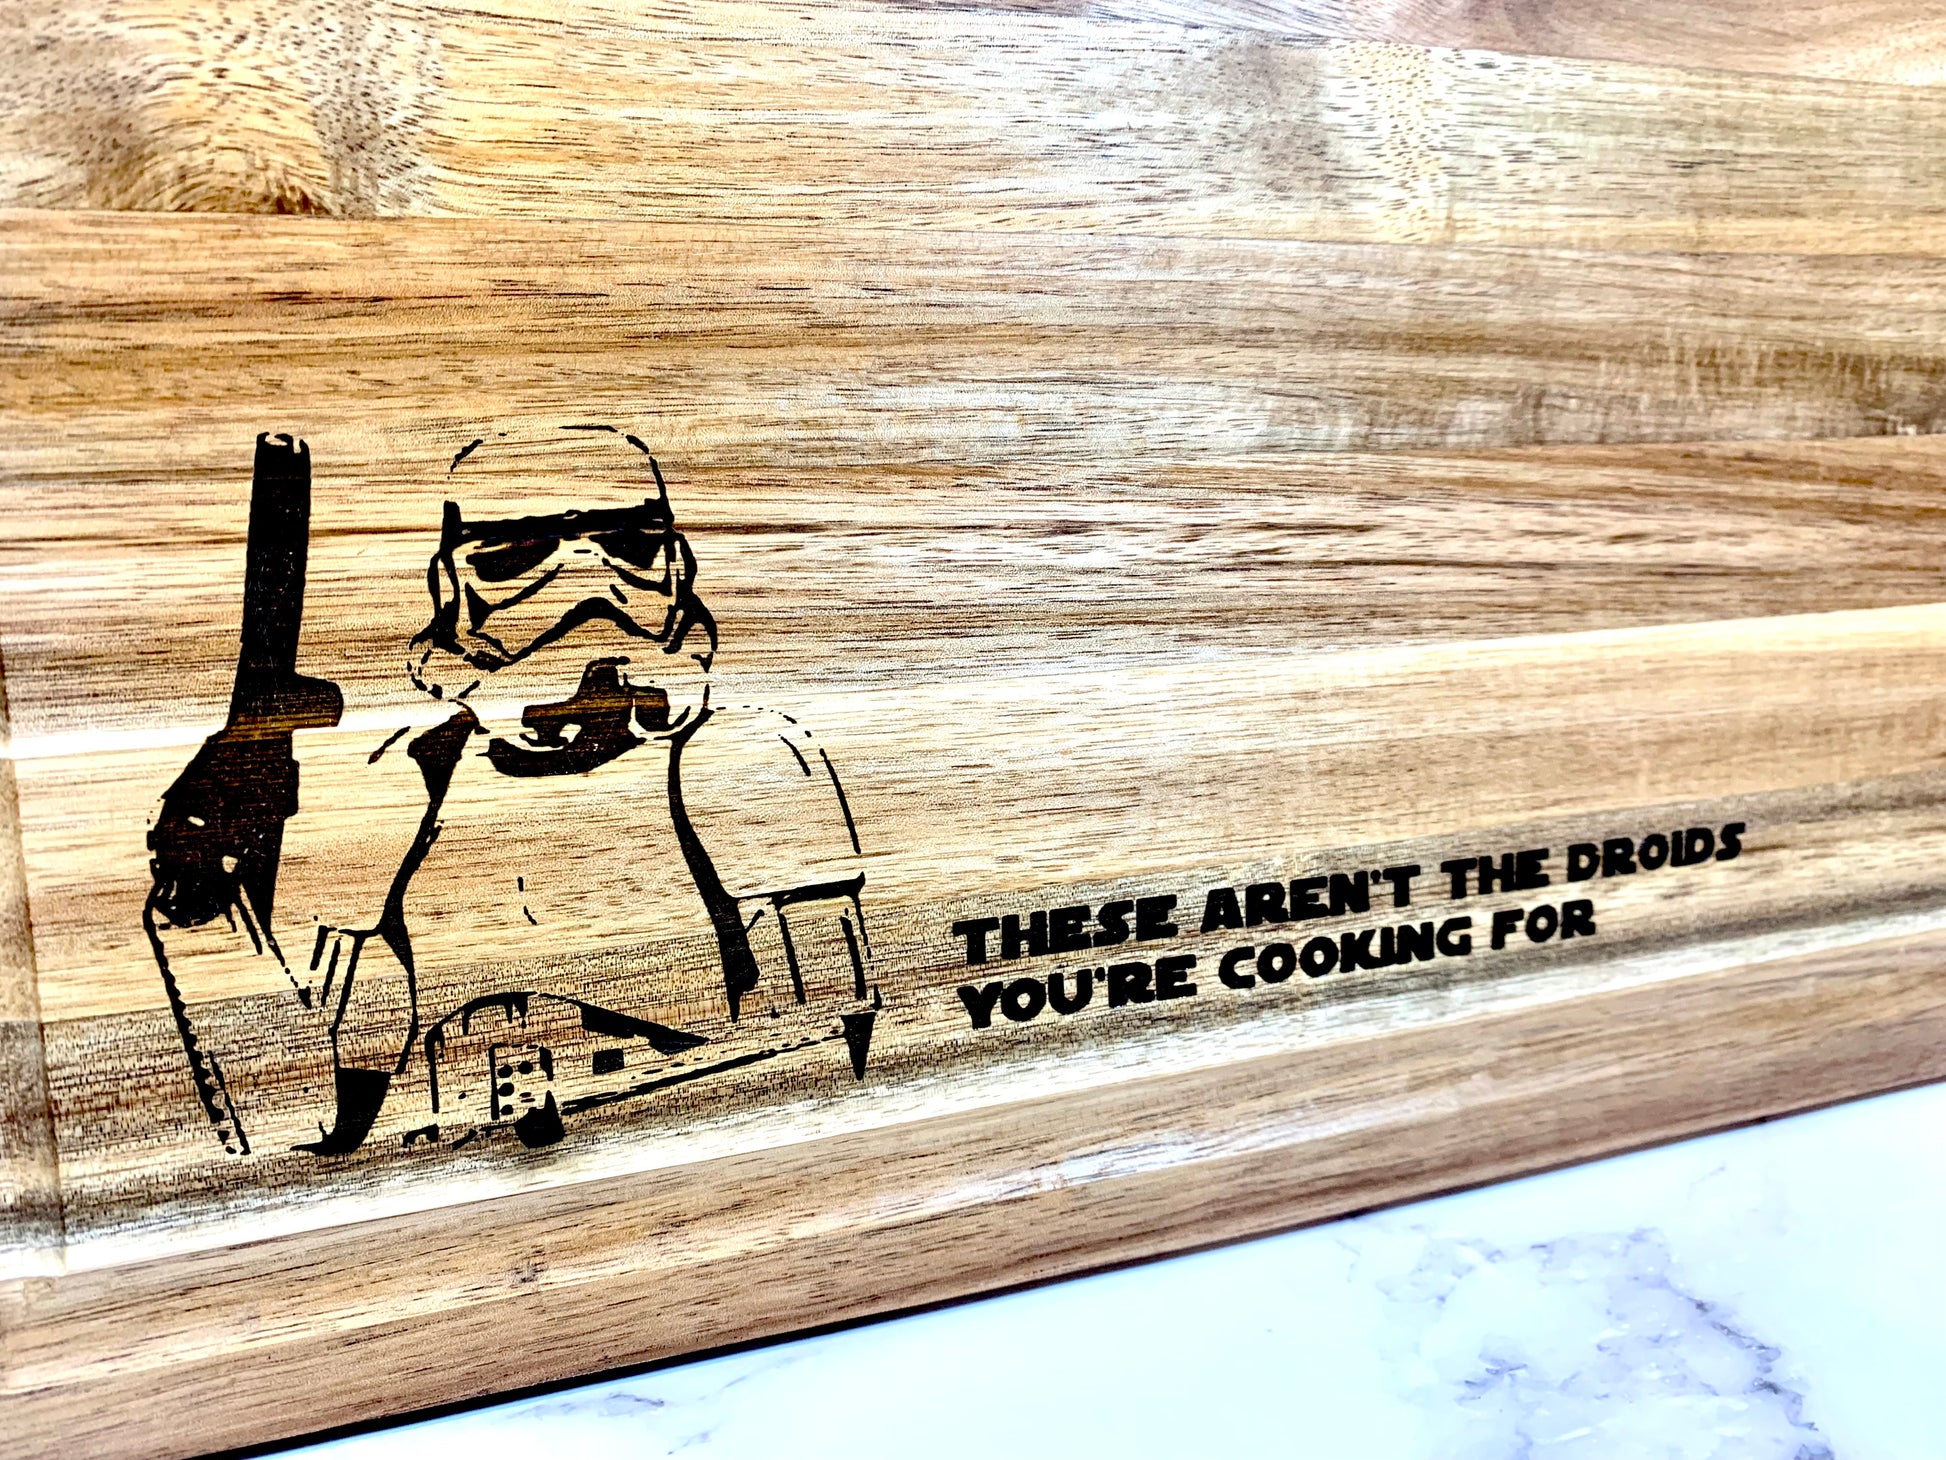 These Aren’t The Droids You Are Cooking For Star Wars Cutting Board - MixMatched Creations